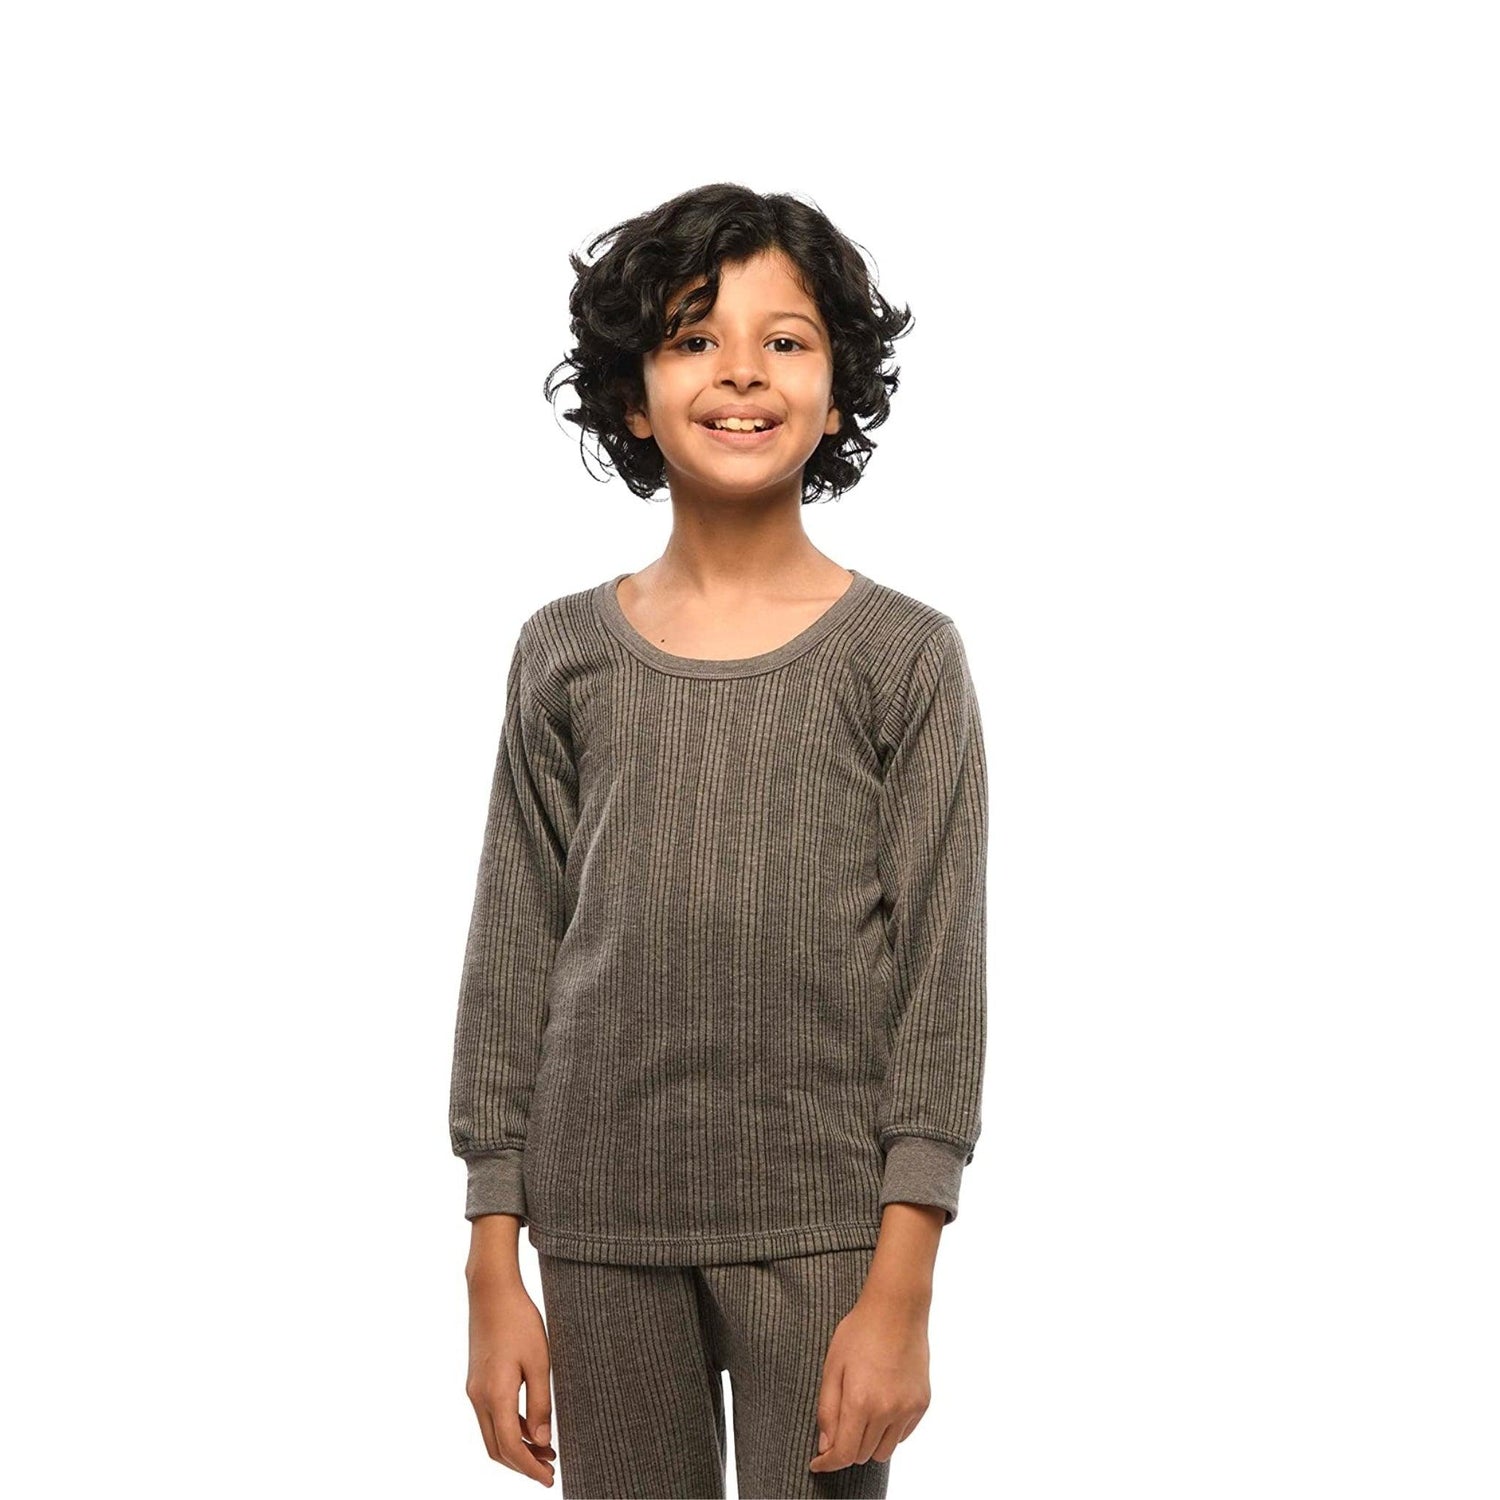 YOUTH ROBE - Kids Thermal - YOUTH ROBE